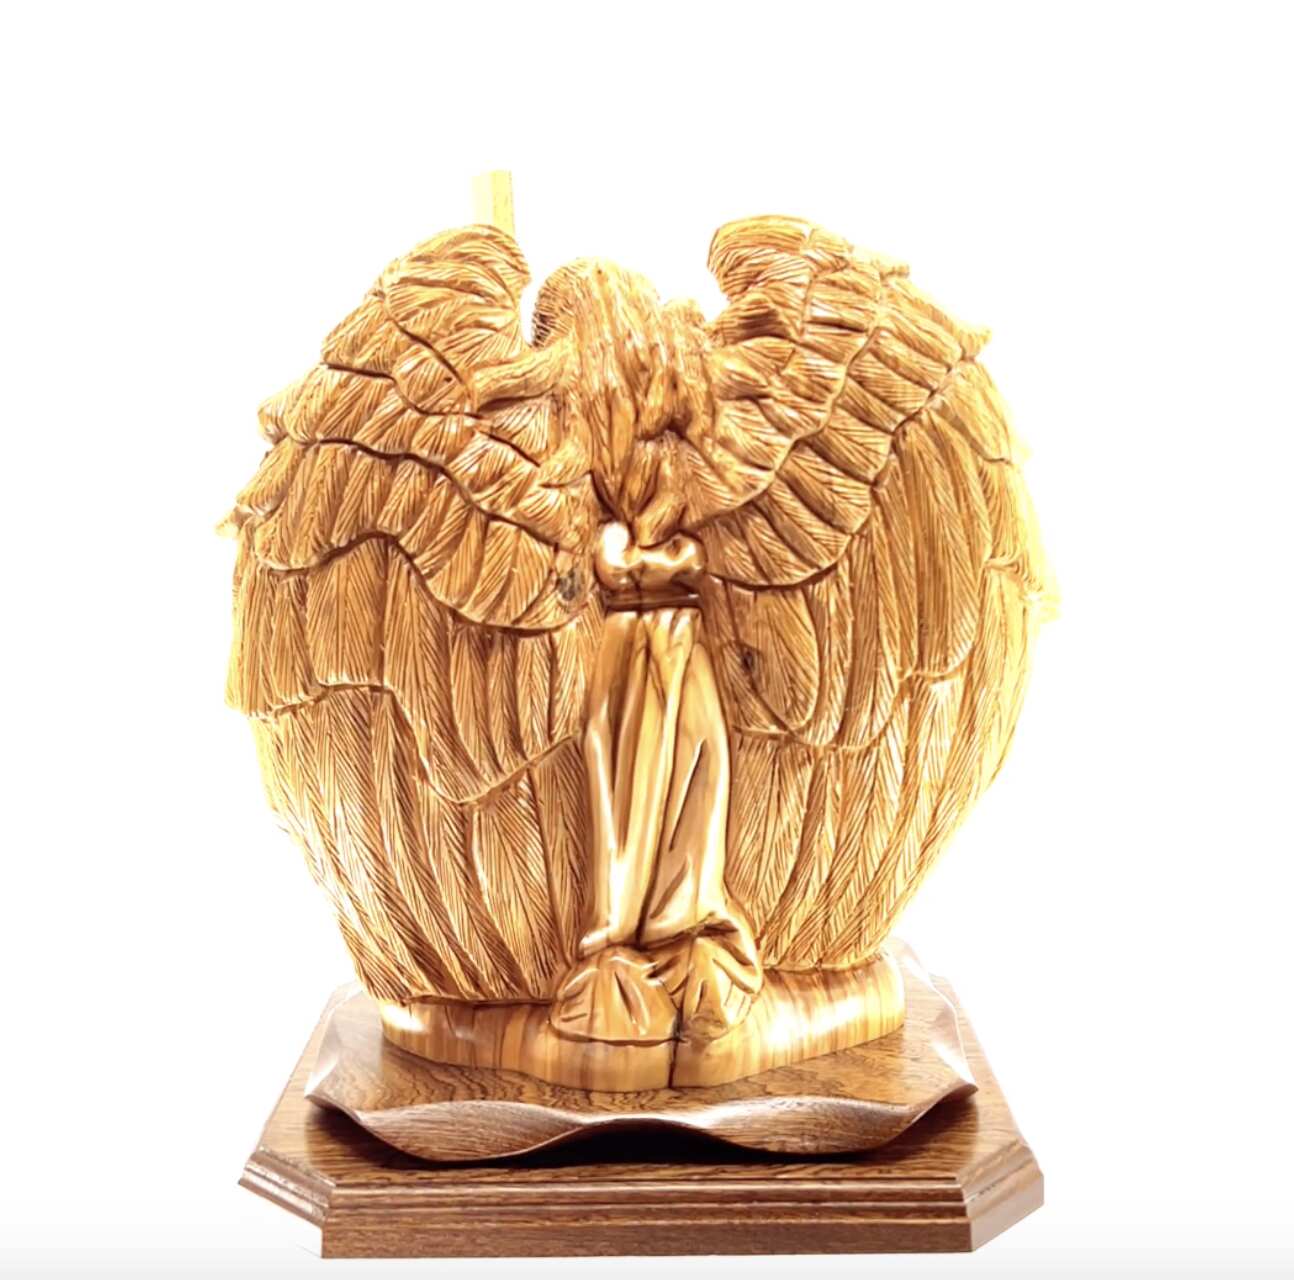 Guardian Angel with Holy Family Nativity Scene Masterpiece 11.8" , Christmas Art Masterpiece Olive Wood Carved Sculpture from the Holy Land